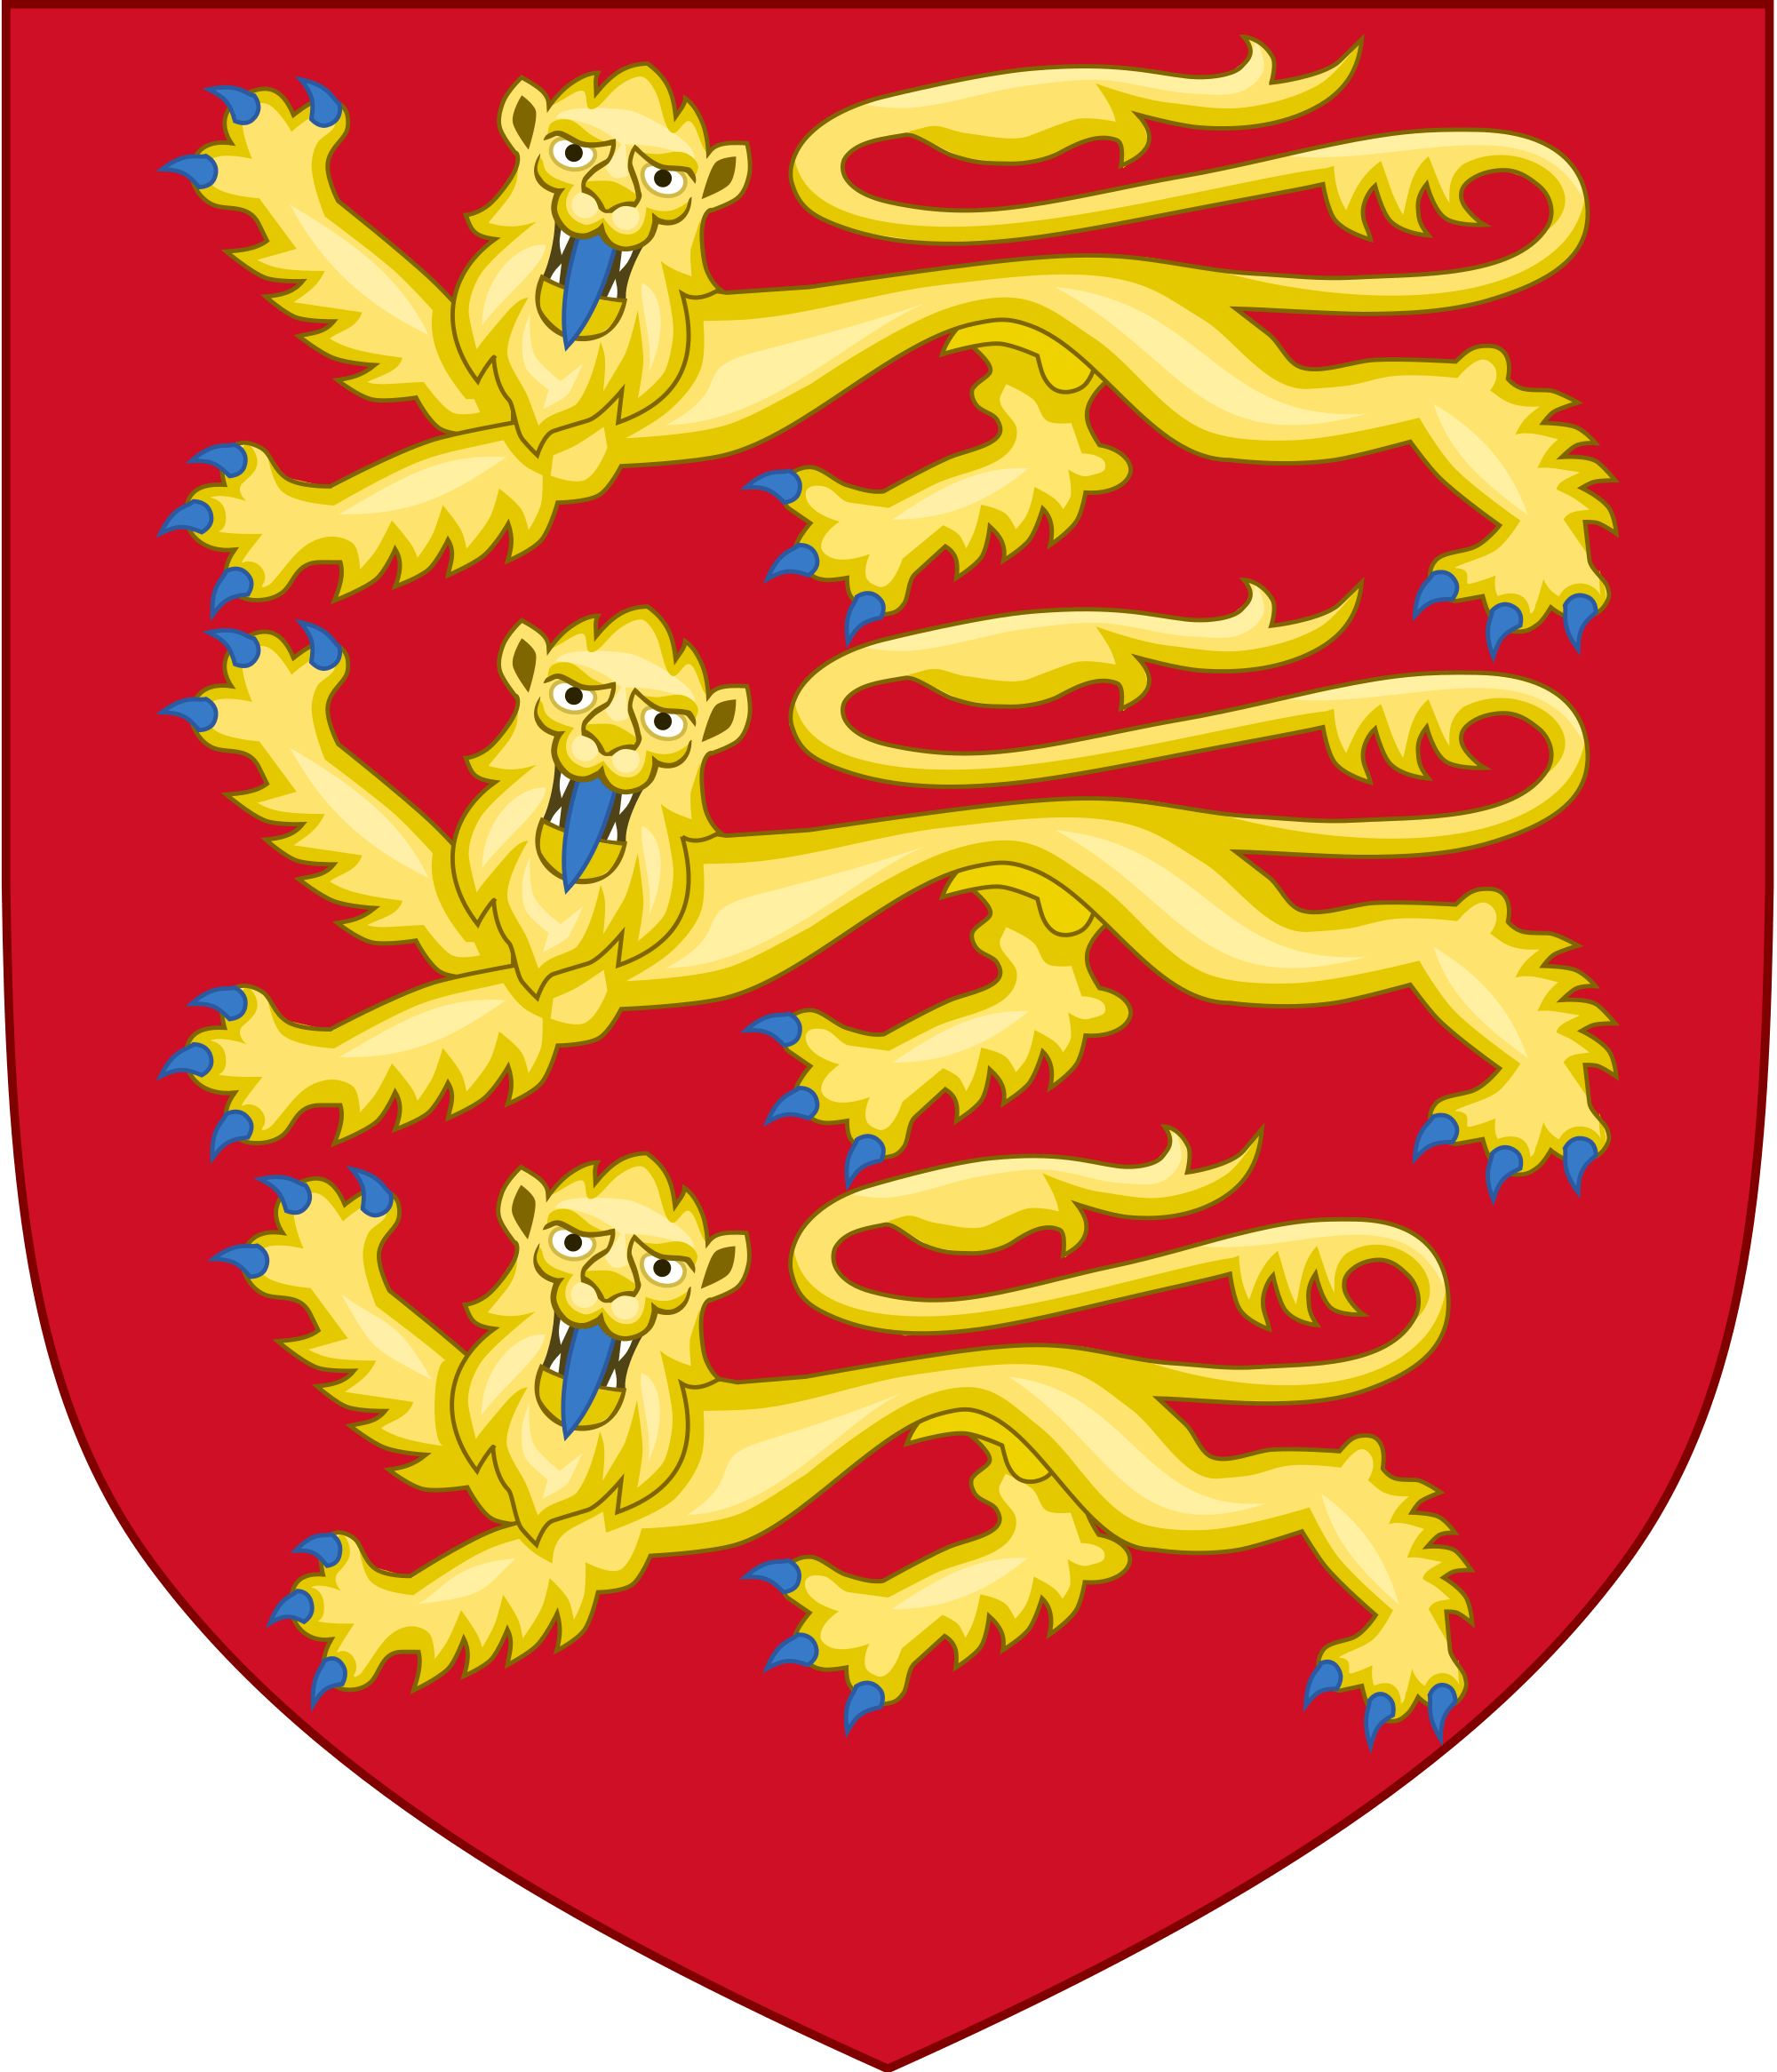 Red with Gold Lion Crown Logo - Royal Arms of England